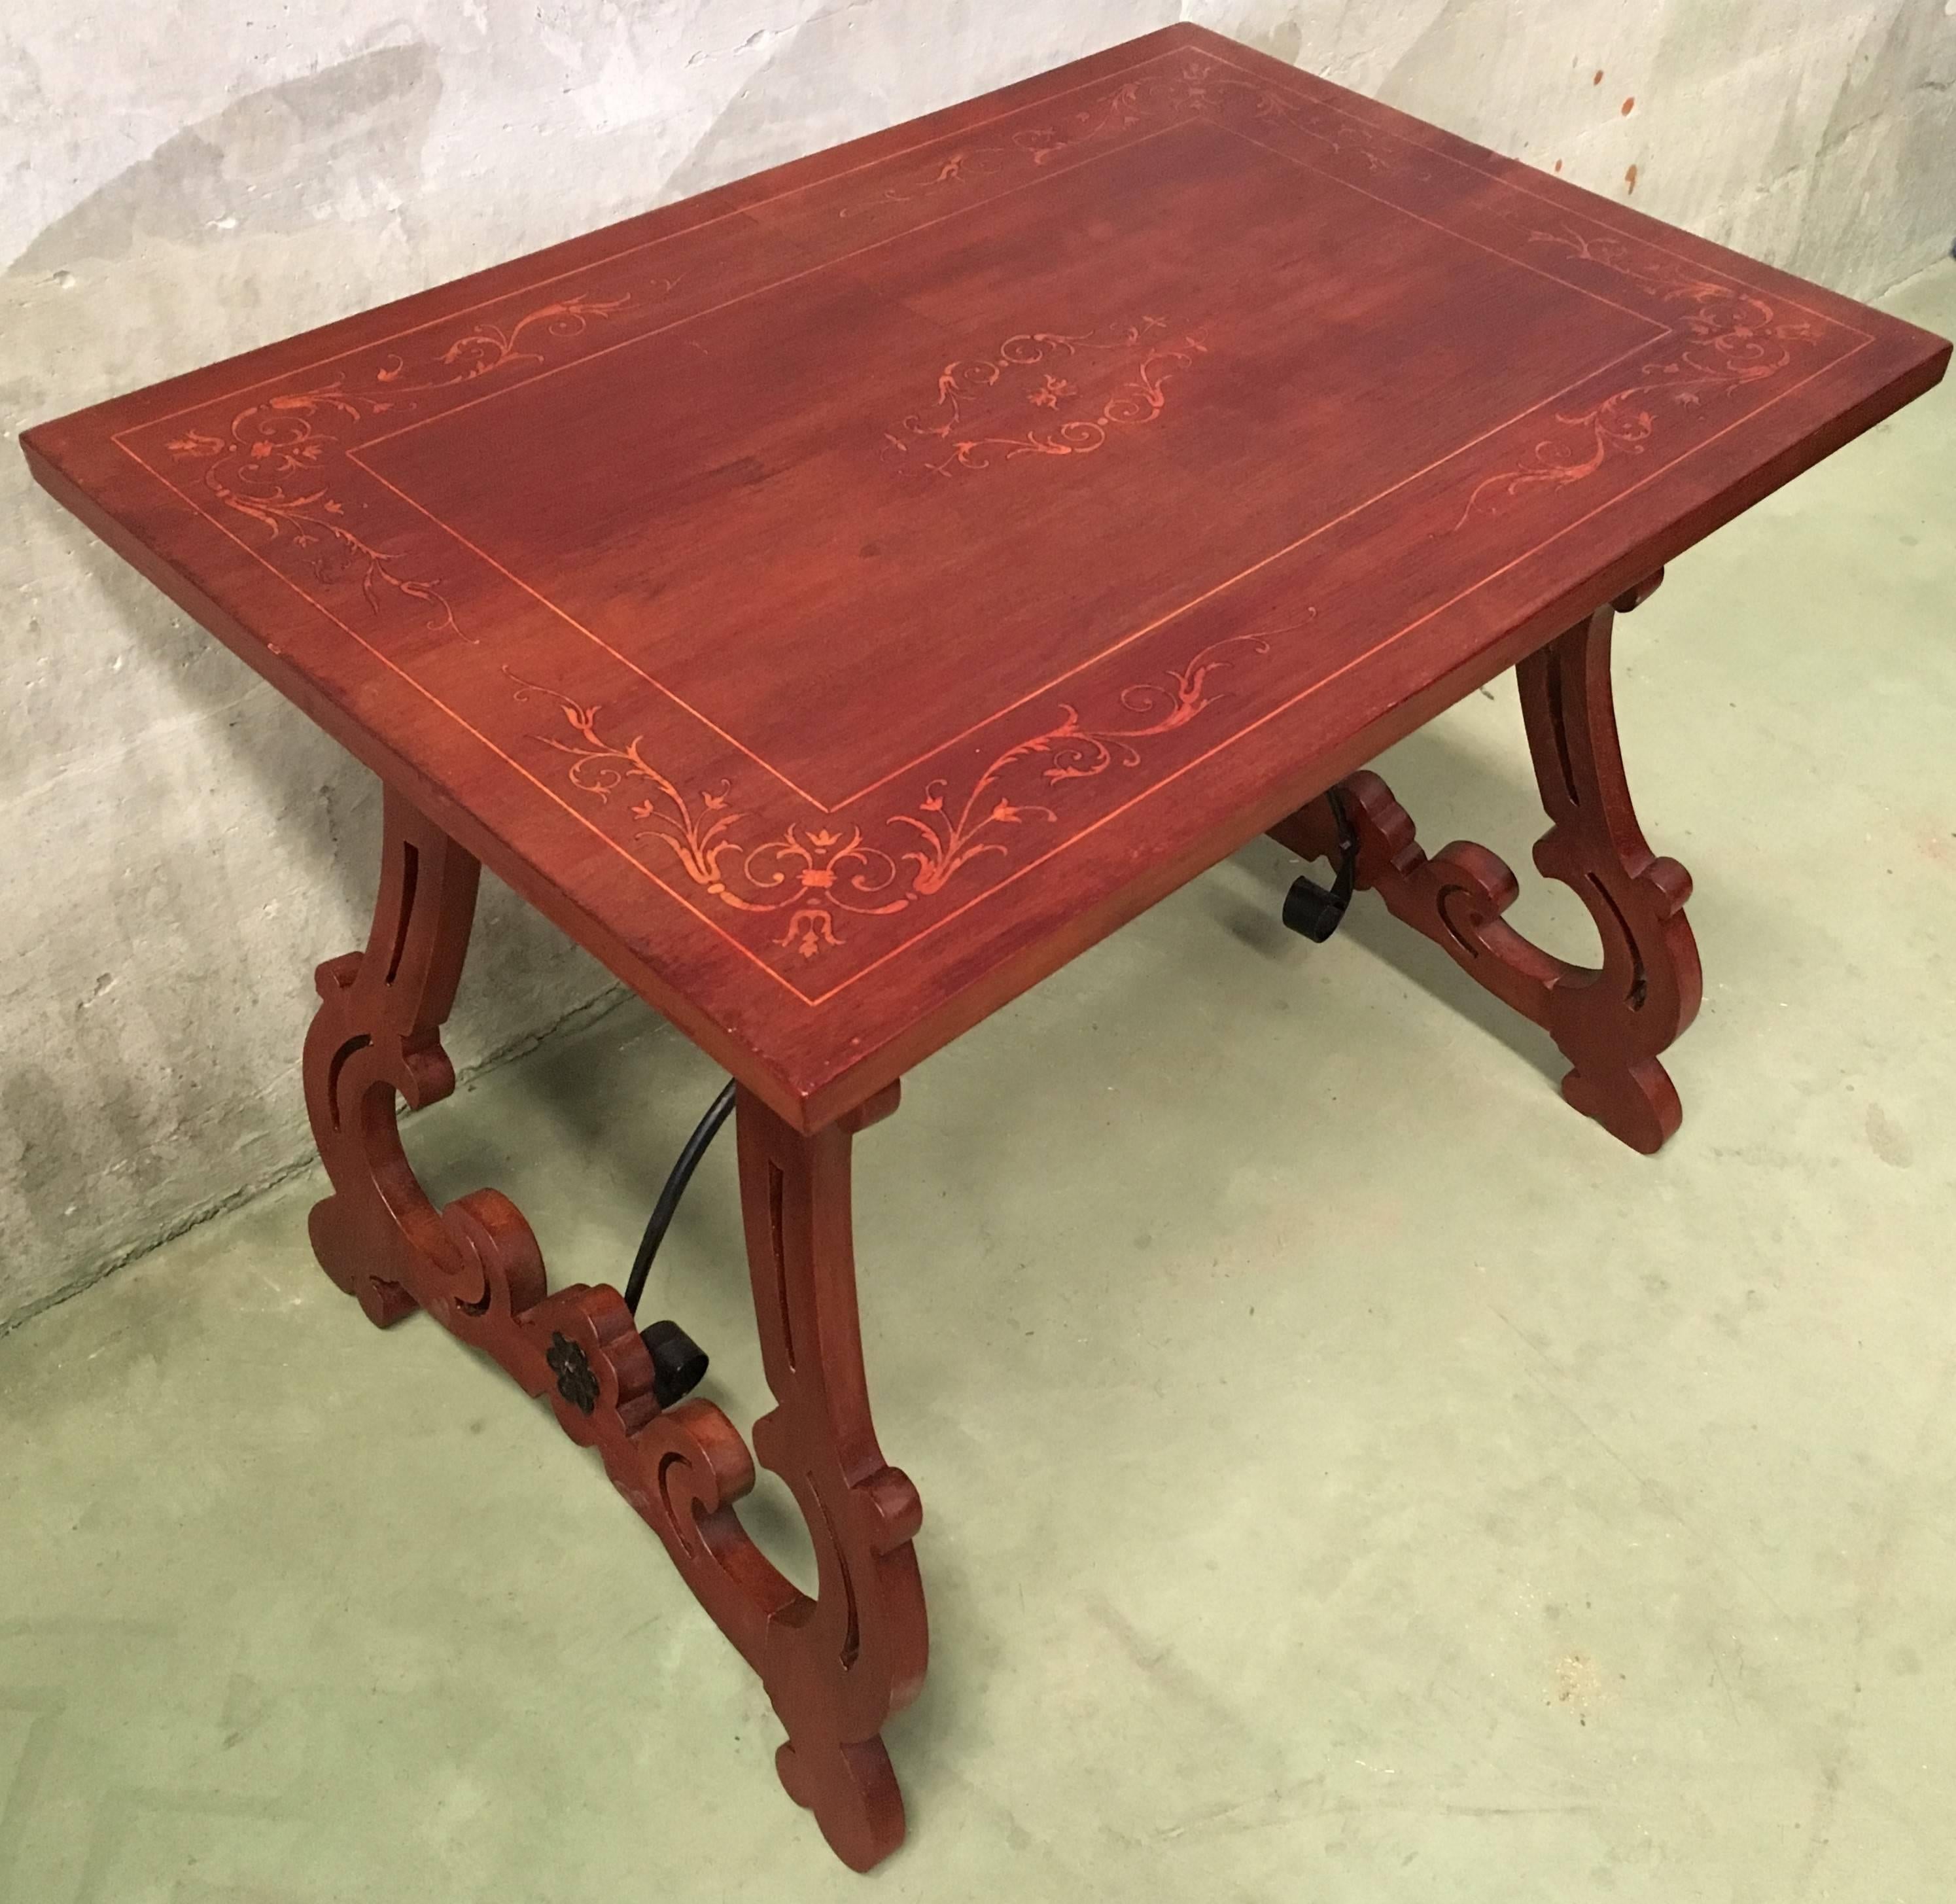 19th century Spanish trestle table in mahogany. This piece has a great scale, lovely carved lyre legs and beautiful marquetry top. . This table could be used as an end table, nightstand, side table, or small desk.
Perfectly restored.